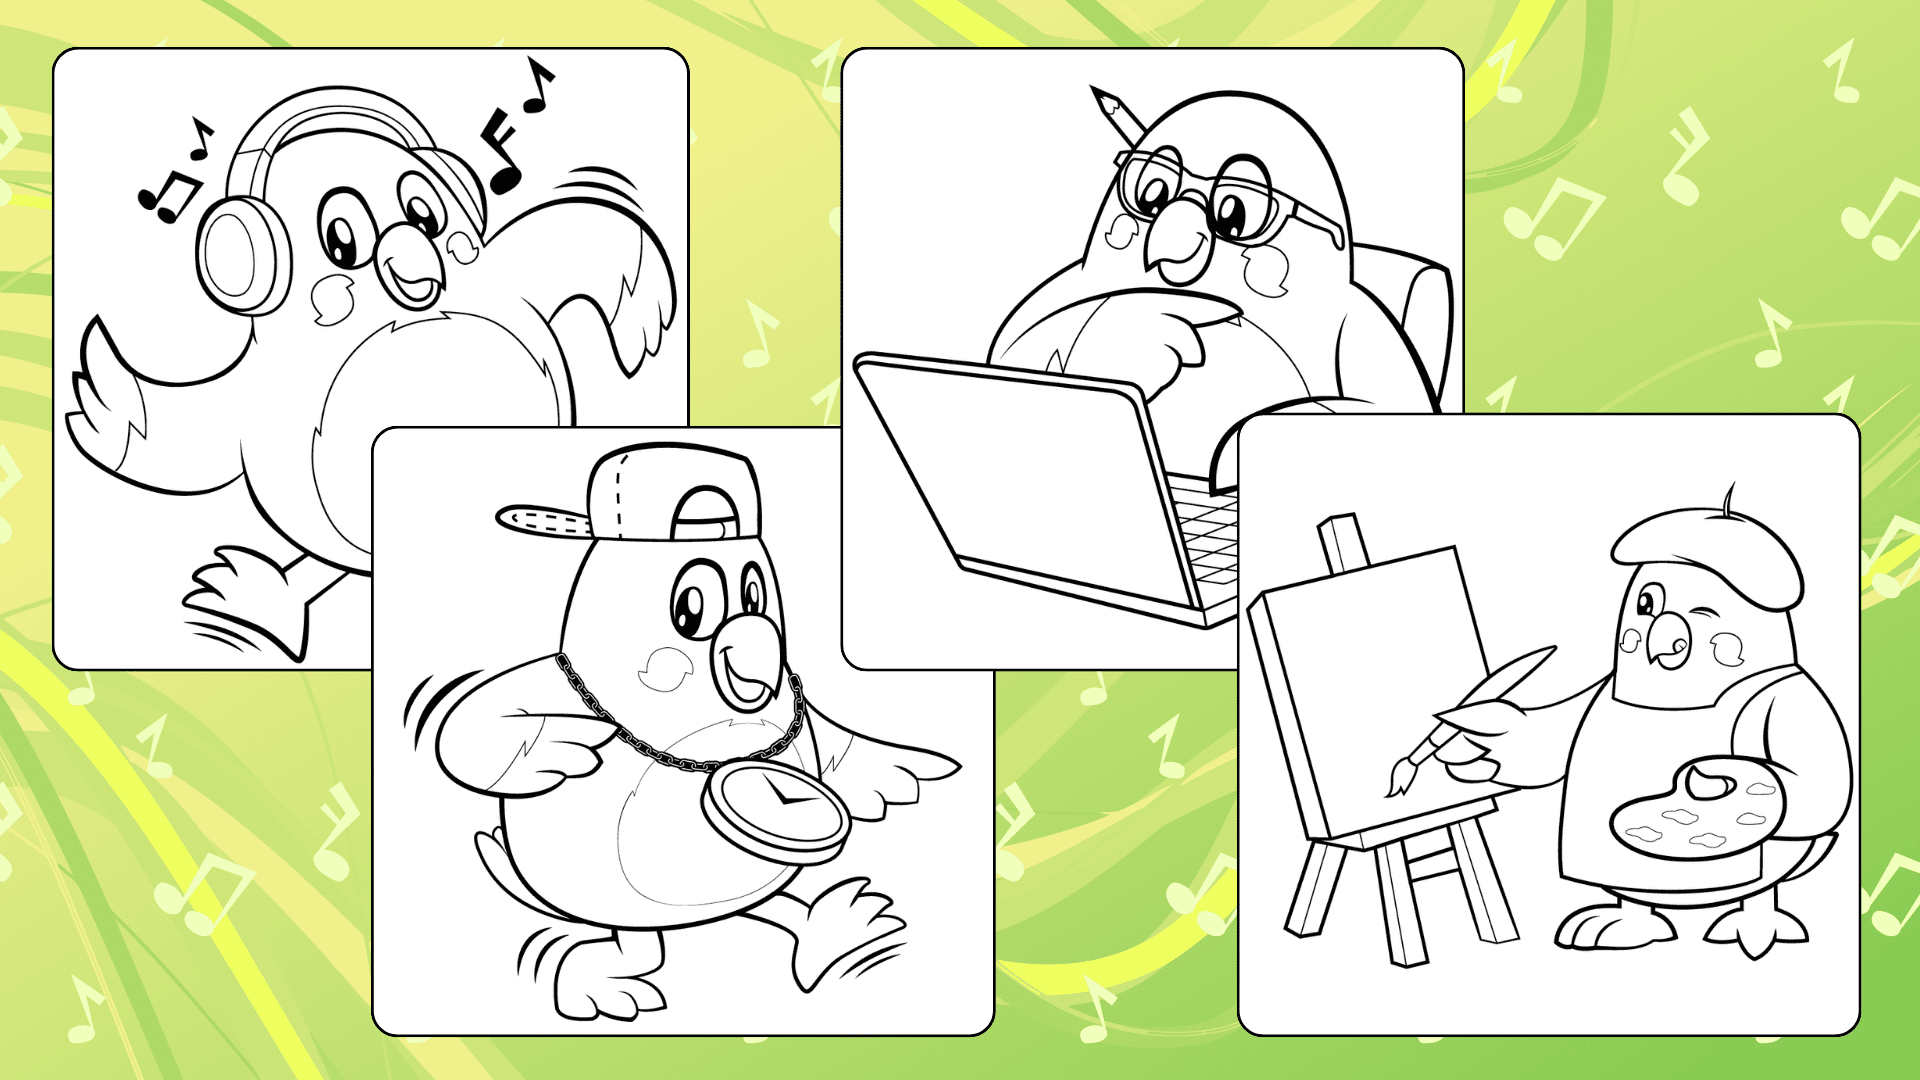 A layout of four easy inspirational coloring pages for kids to print out. The background shows wavy lime green lines and musical notes.